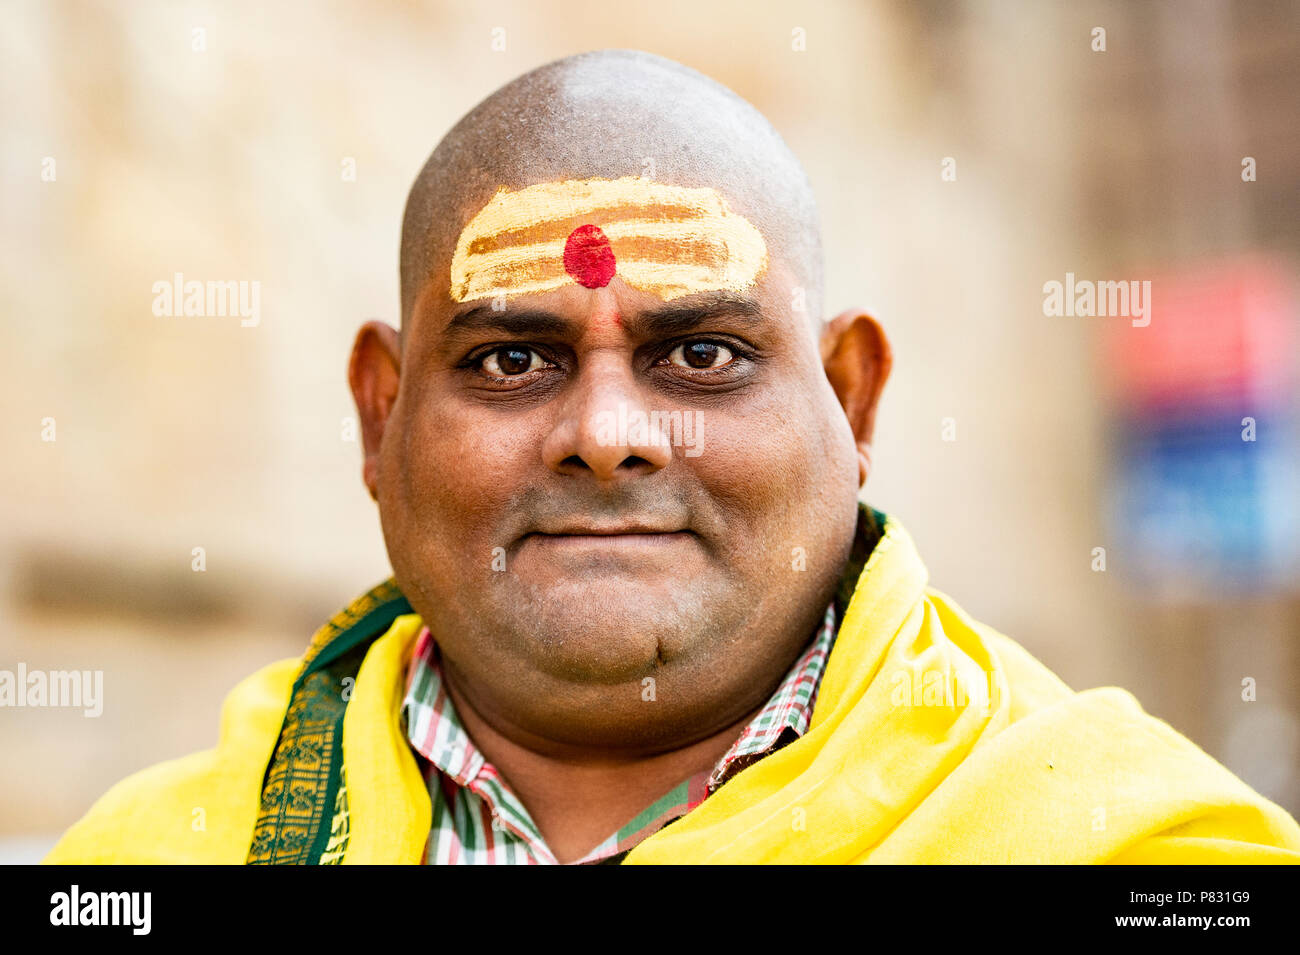 VARANASI - INDIA - 13 JANUARY 2018. Portrait of a shaved man walking on the ghat in Varanasi also known as Benares, India. Stock Photo